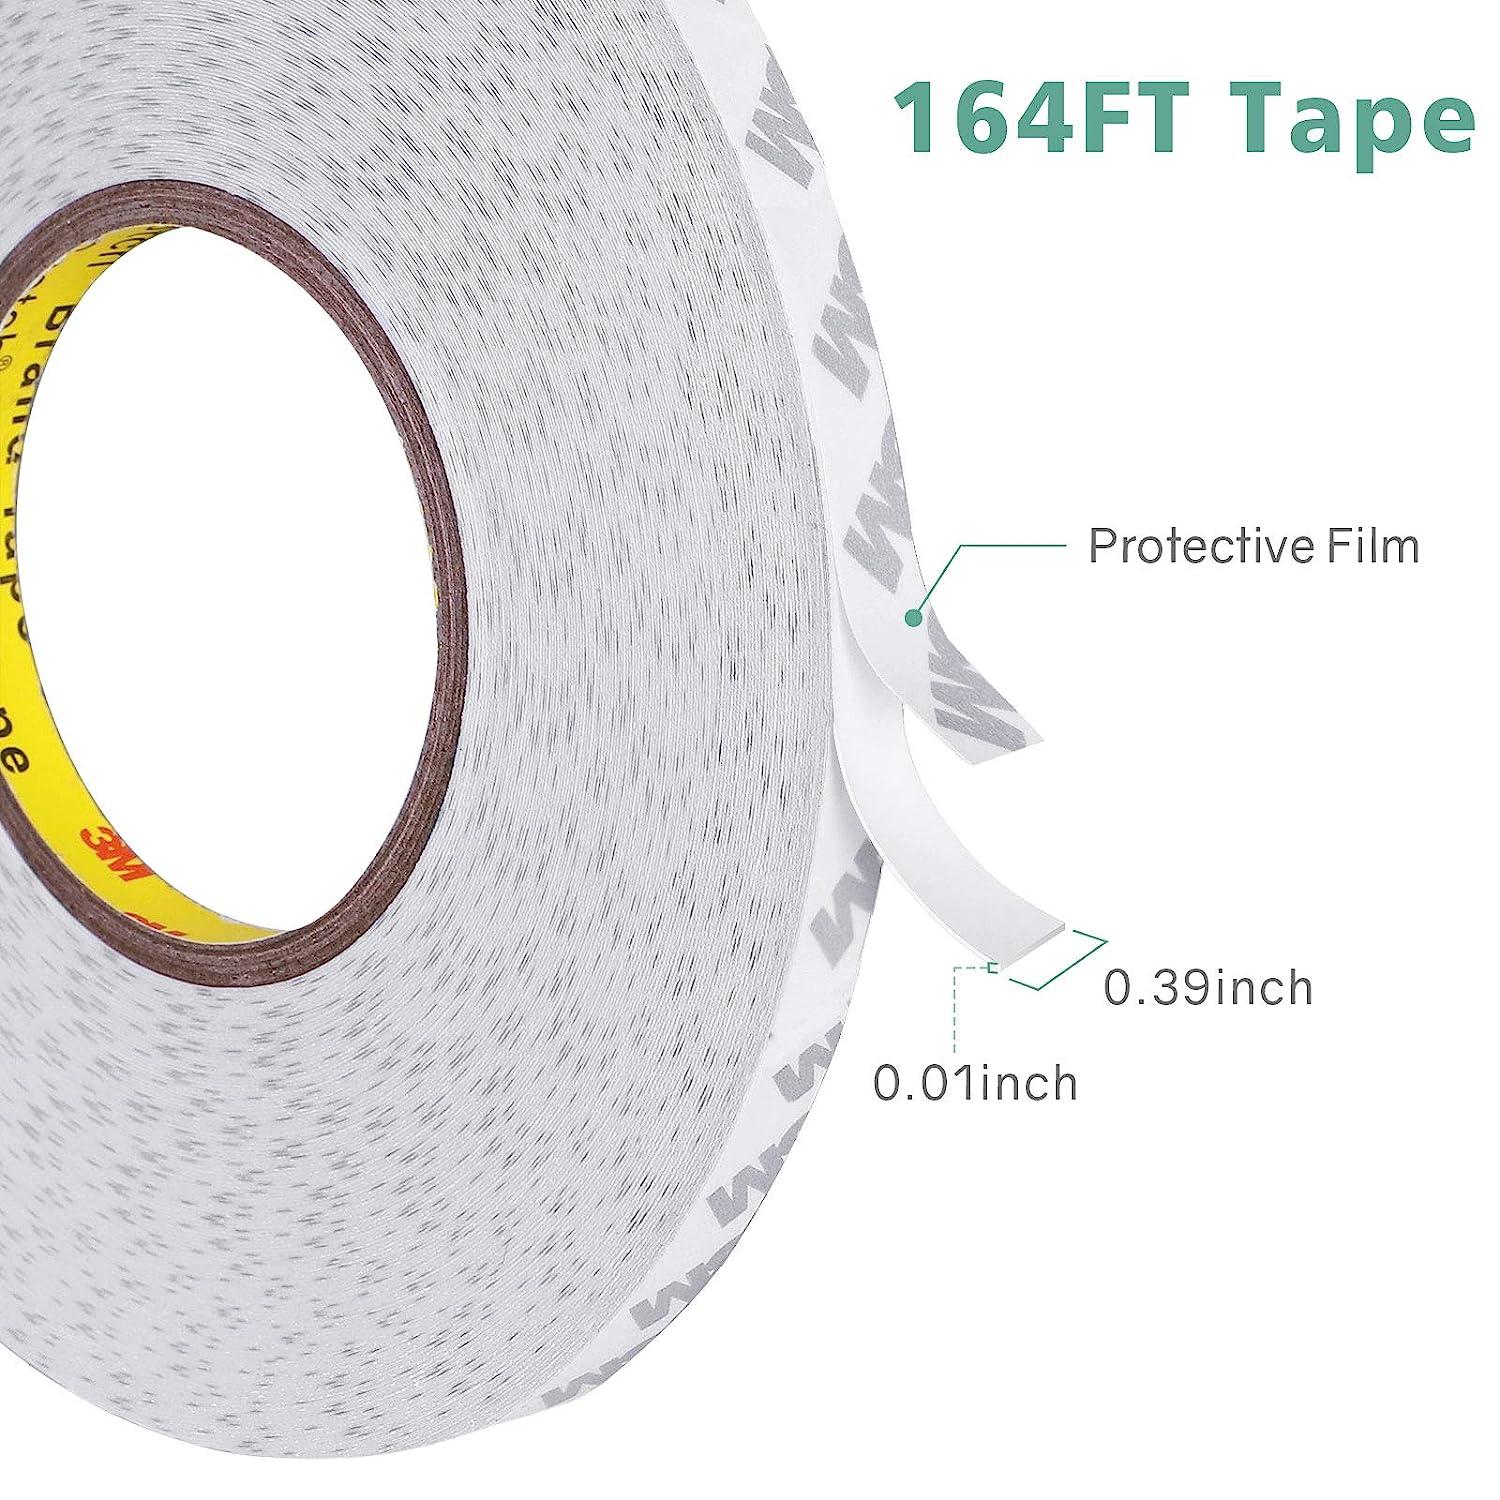 Double Sided Tape Heavy Duty 164ft Waterproof Mounting Adhesive Tape  Removable Tape for Walls Poster LED Strip Car Trim Home/Office Decor Craft  Project Made of 3M Tape White (164ft x 0.39in)